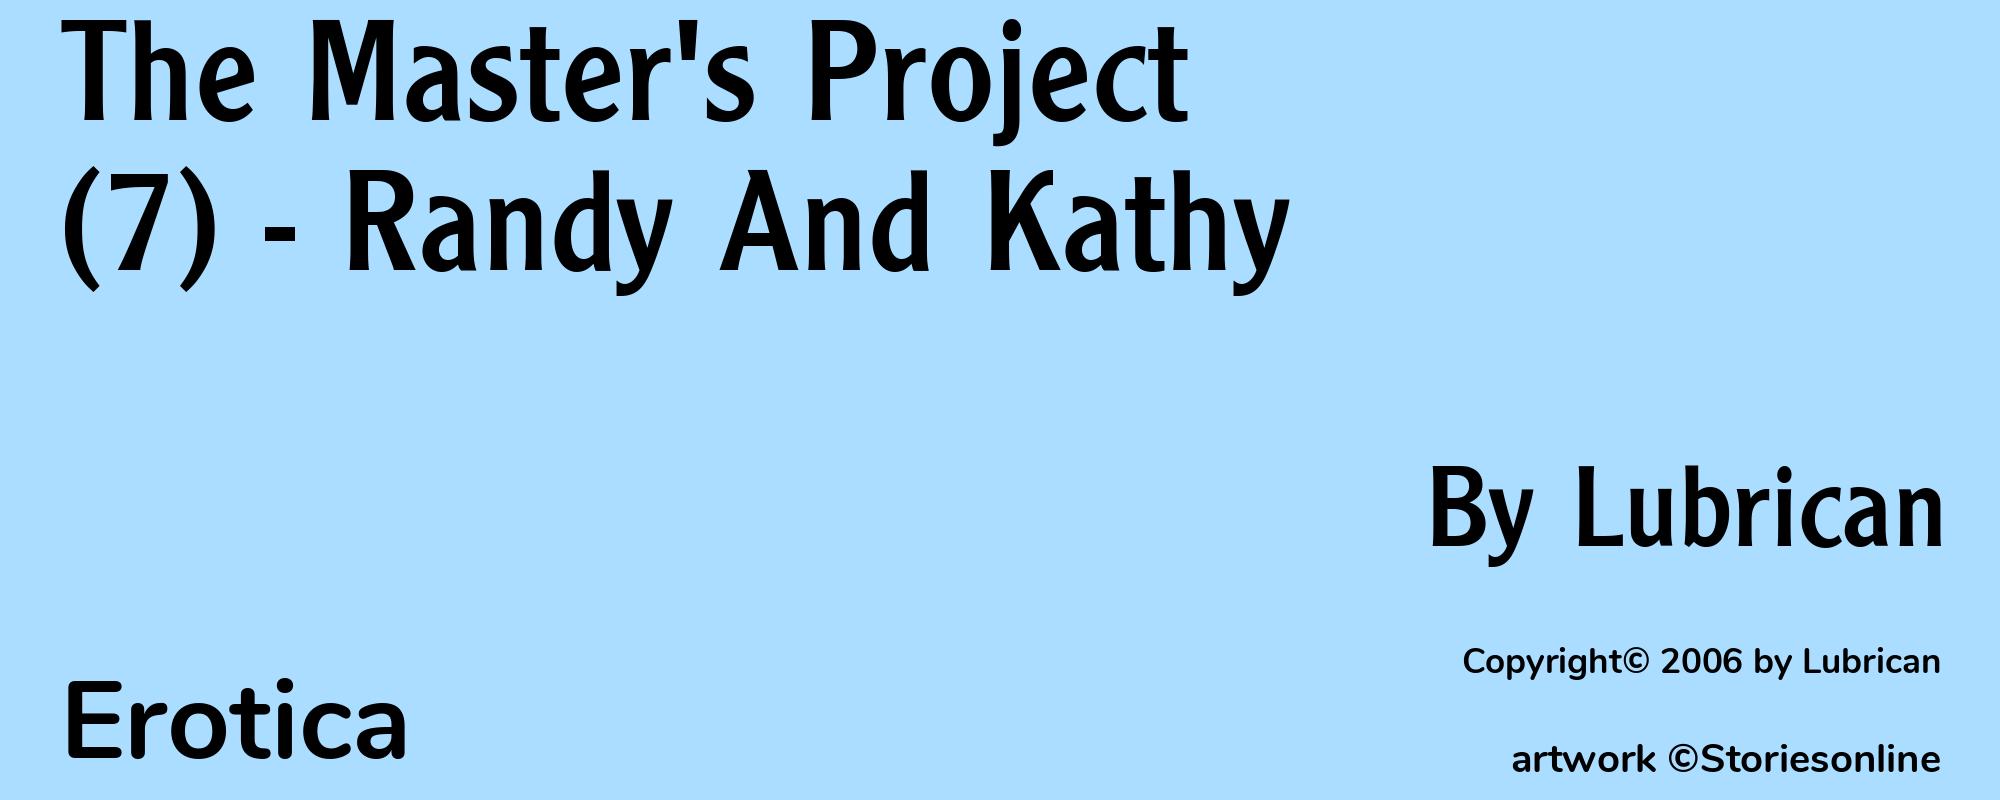 The Master's Project (7) - Randy And Kathy - Cover